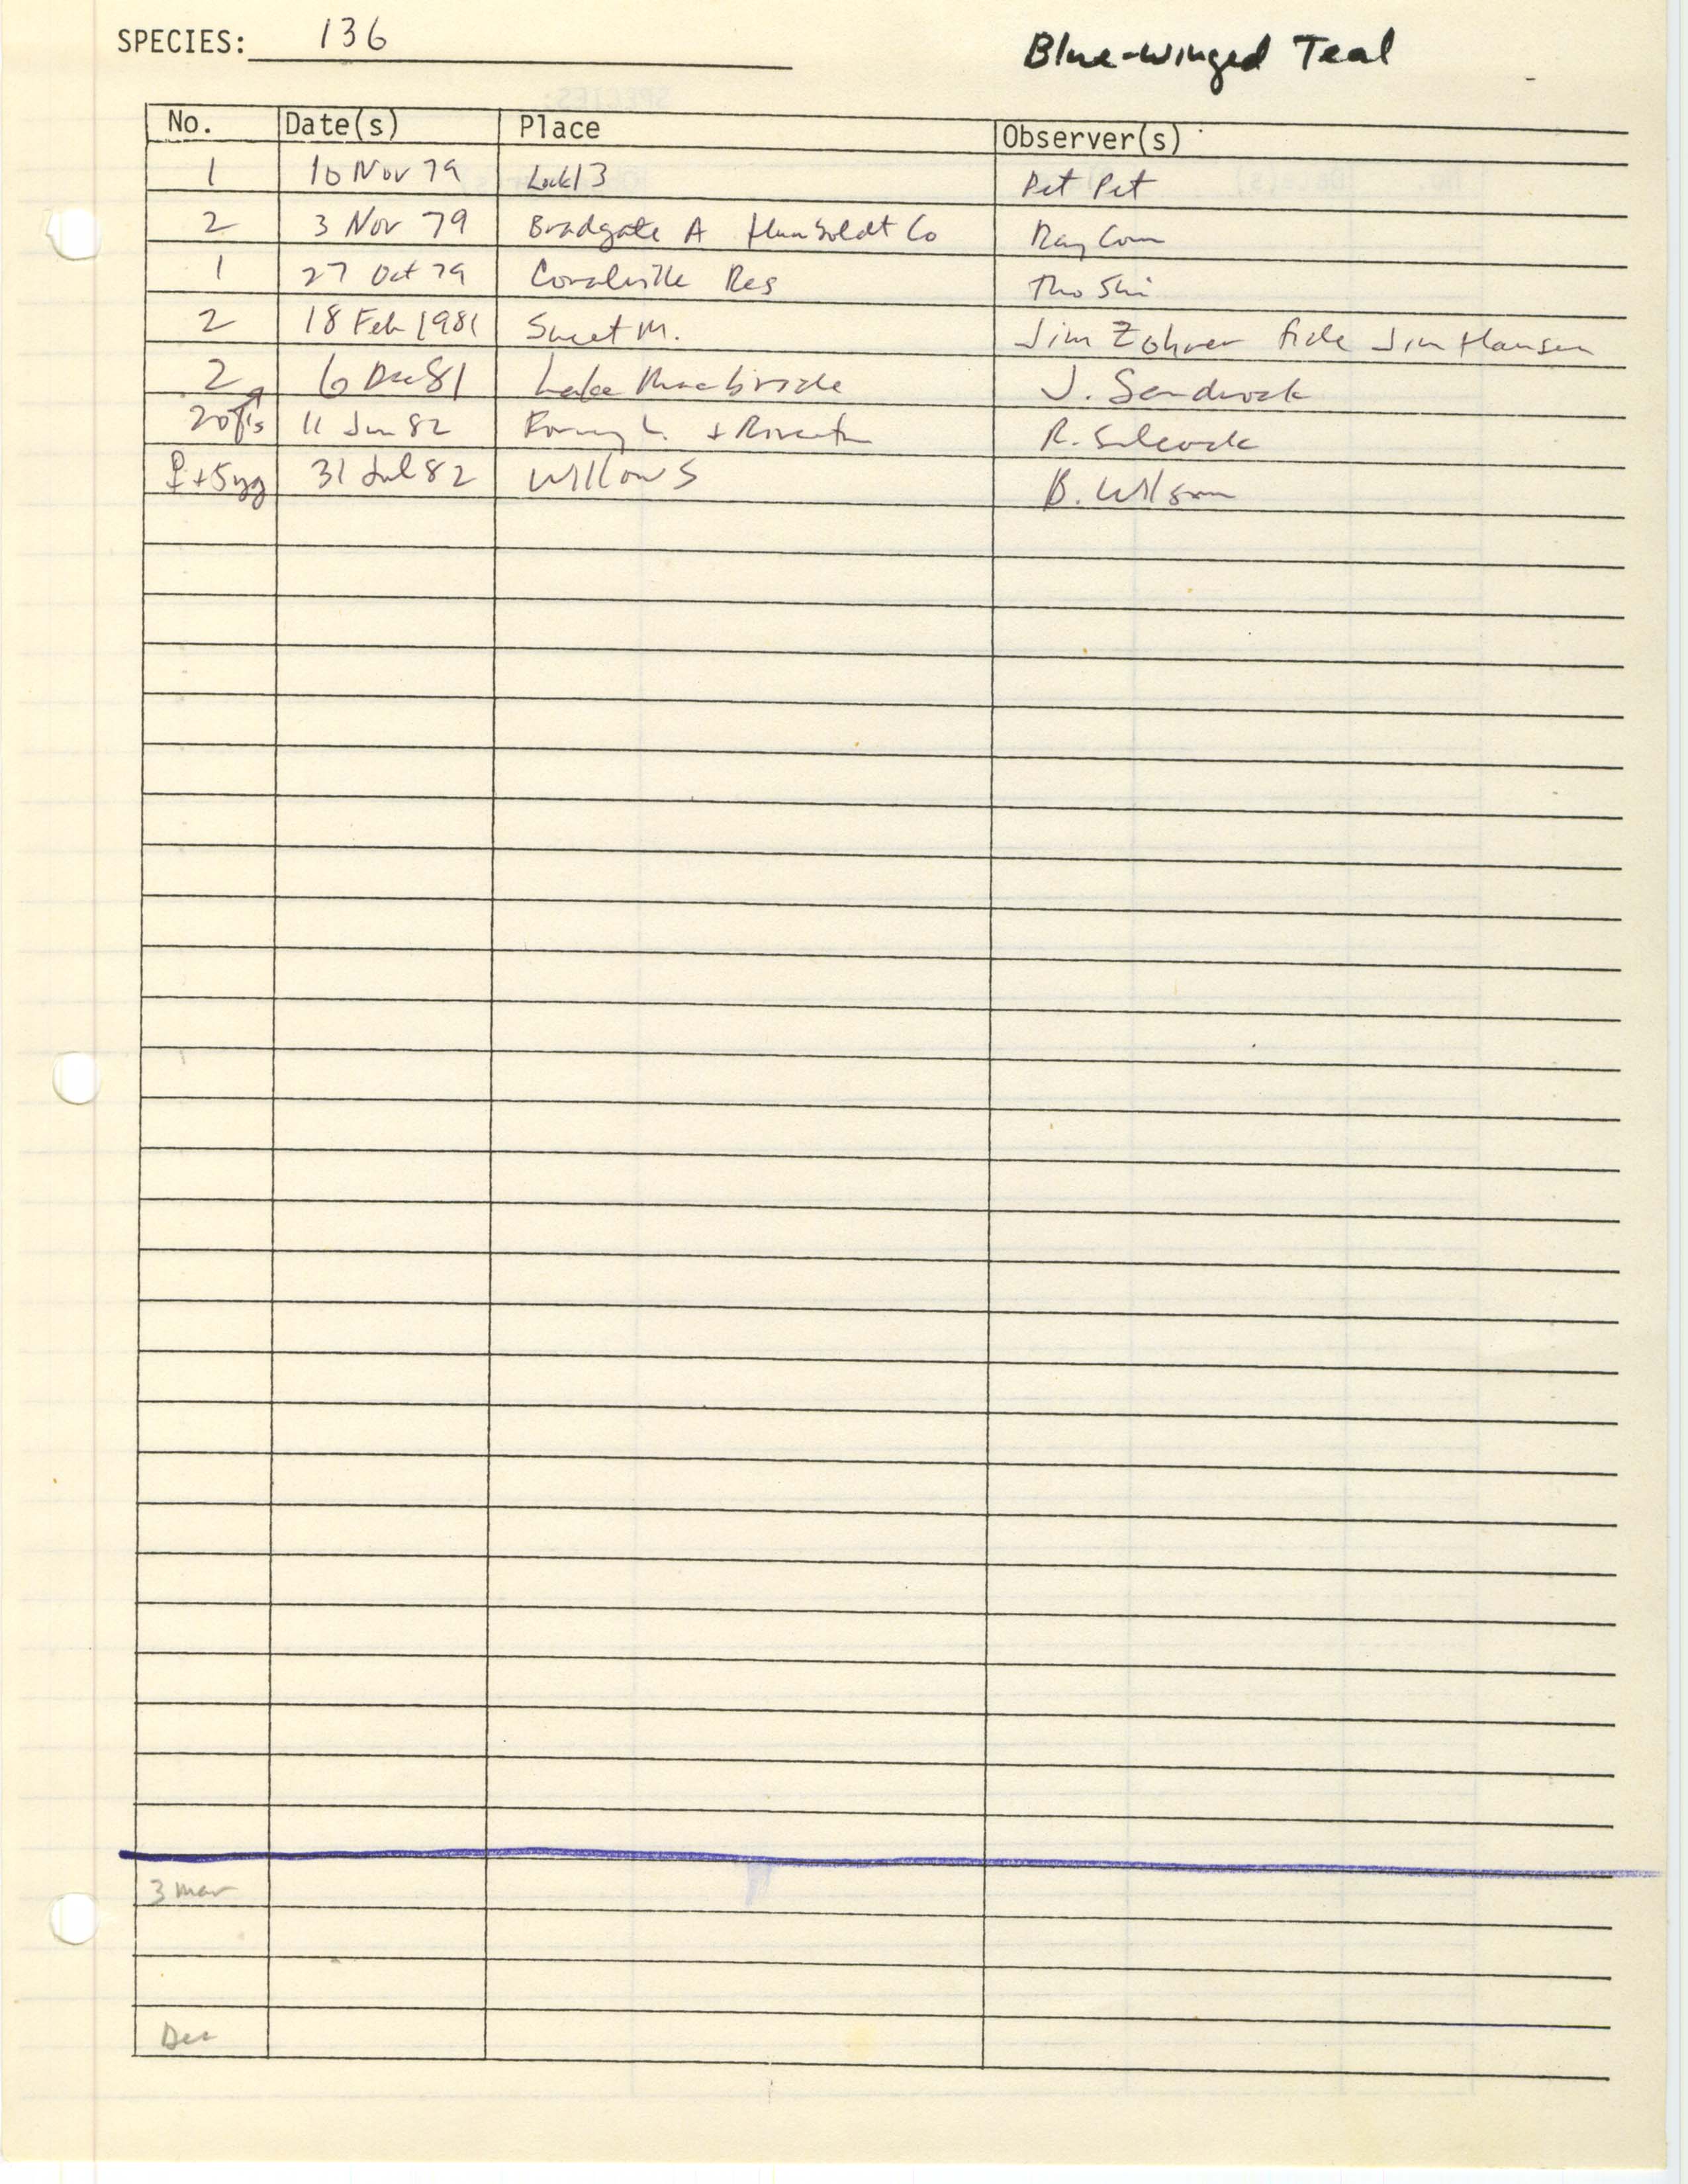 Iowa Ornithologists' Union, field report compiled data, Blue-winged Teal, 1979-1982